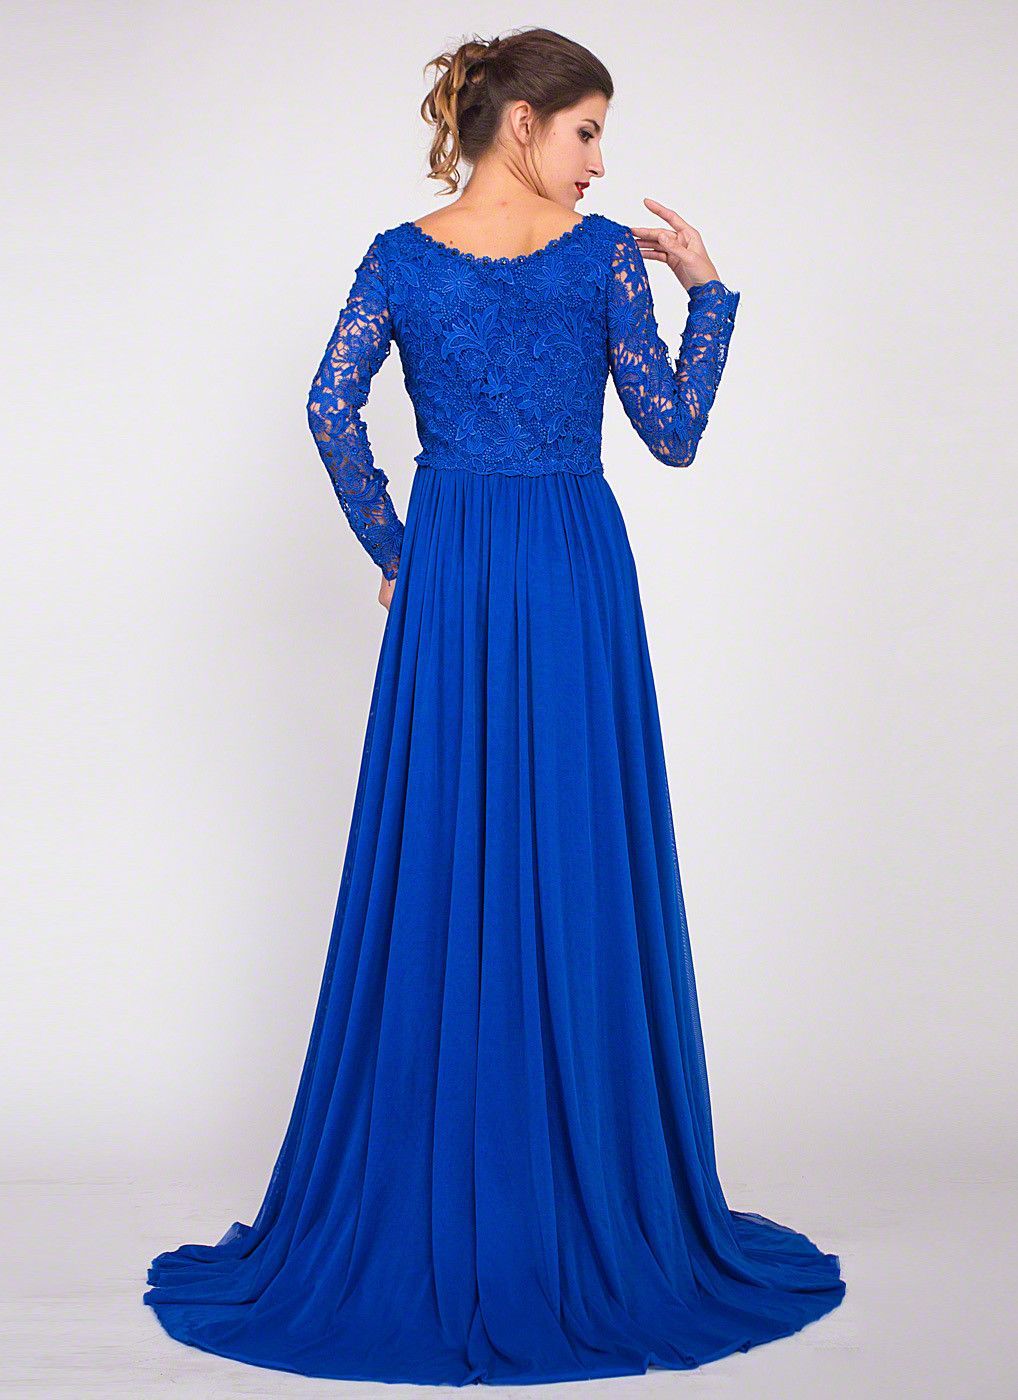 Royal Blue Floor Length Lace Evening Gown with Rhinestone Embellishment